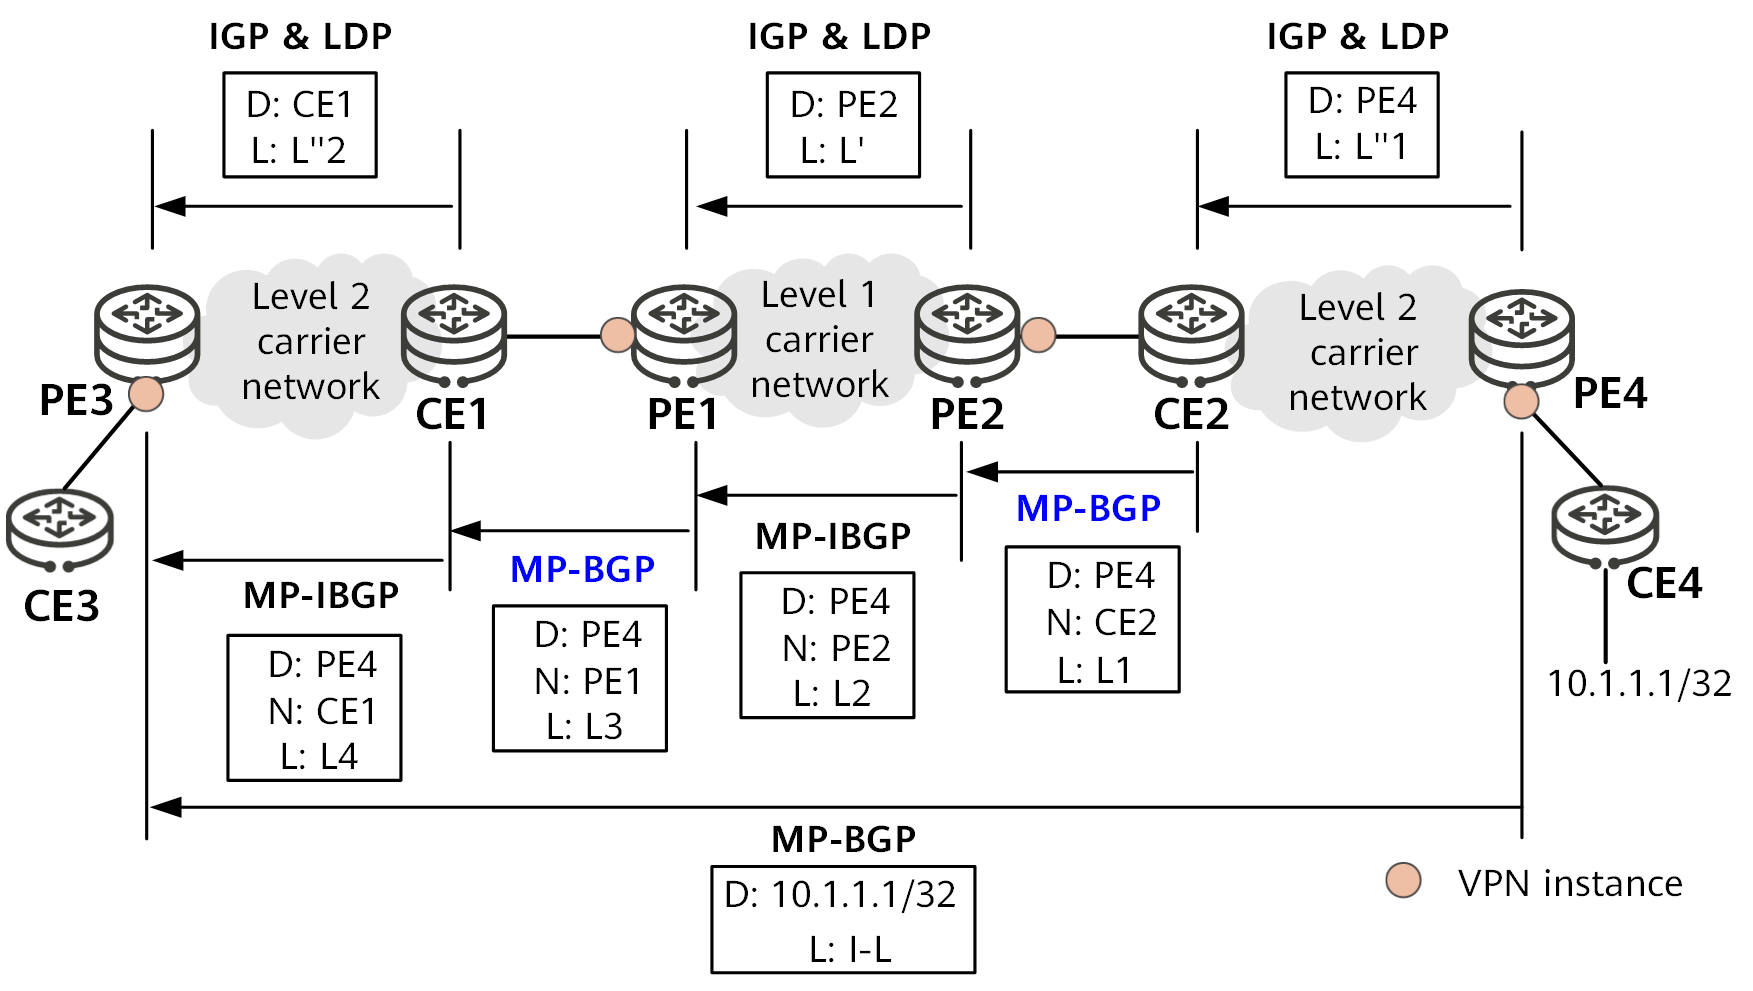 Routing information exchange based on BGP labeled routes